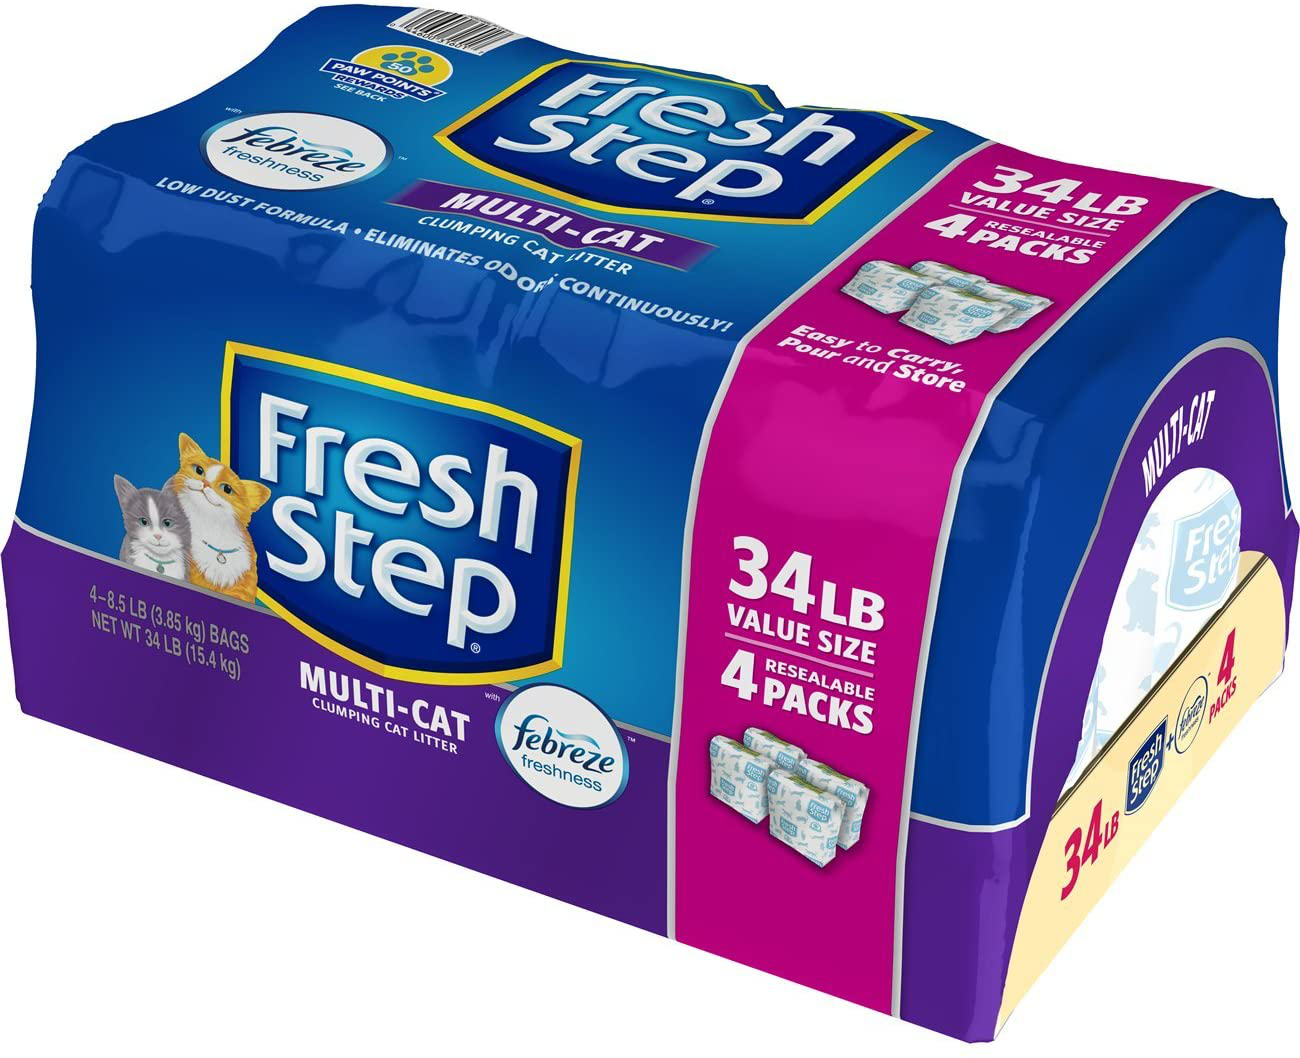 Fresh Step Multi-Cat with Febreze Freshness, Clumping Cat Litter, Scented, 34 Pounds, Resealable 4 Packs Animals & Pet Supplies > Pet Supplies > Cat Supplies > Cat Litter Fresh Step   